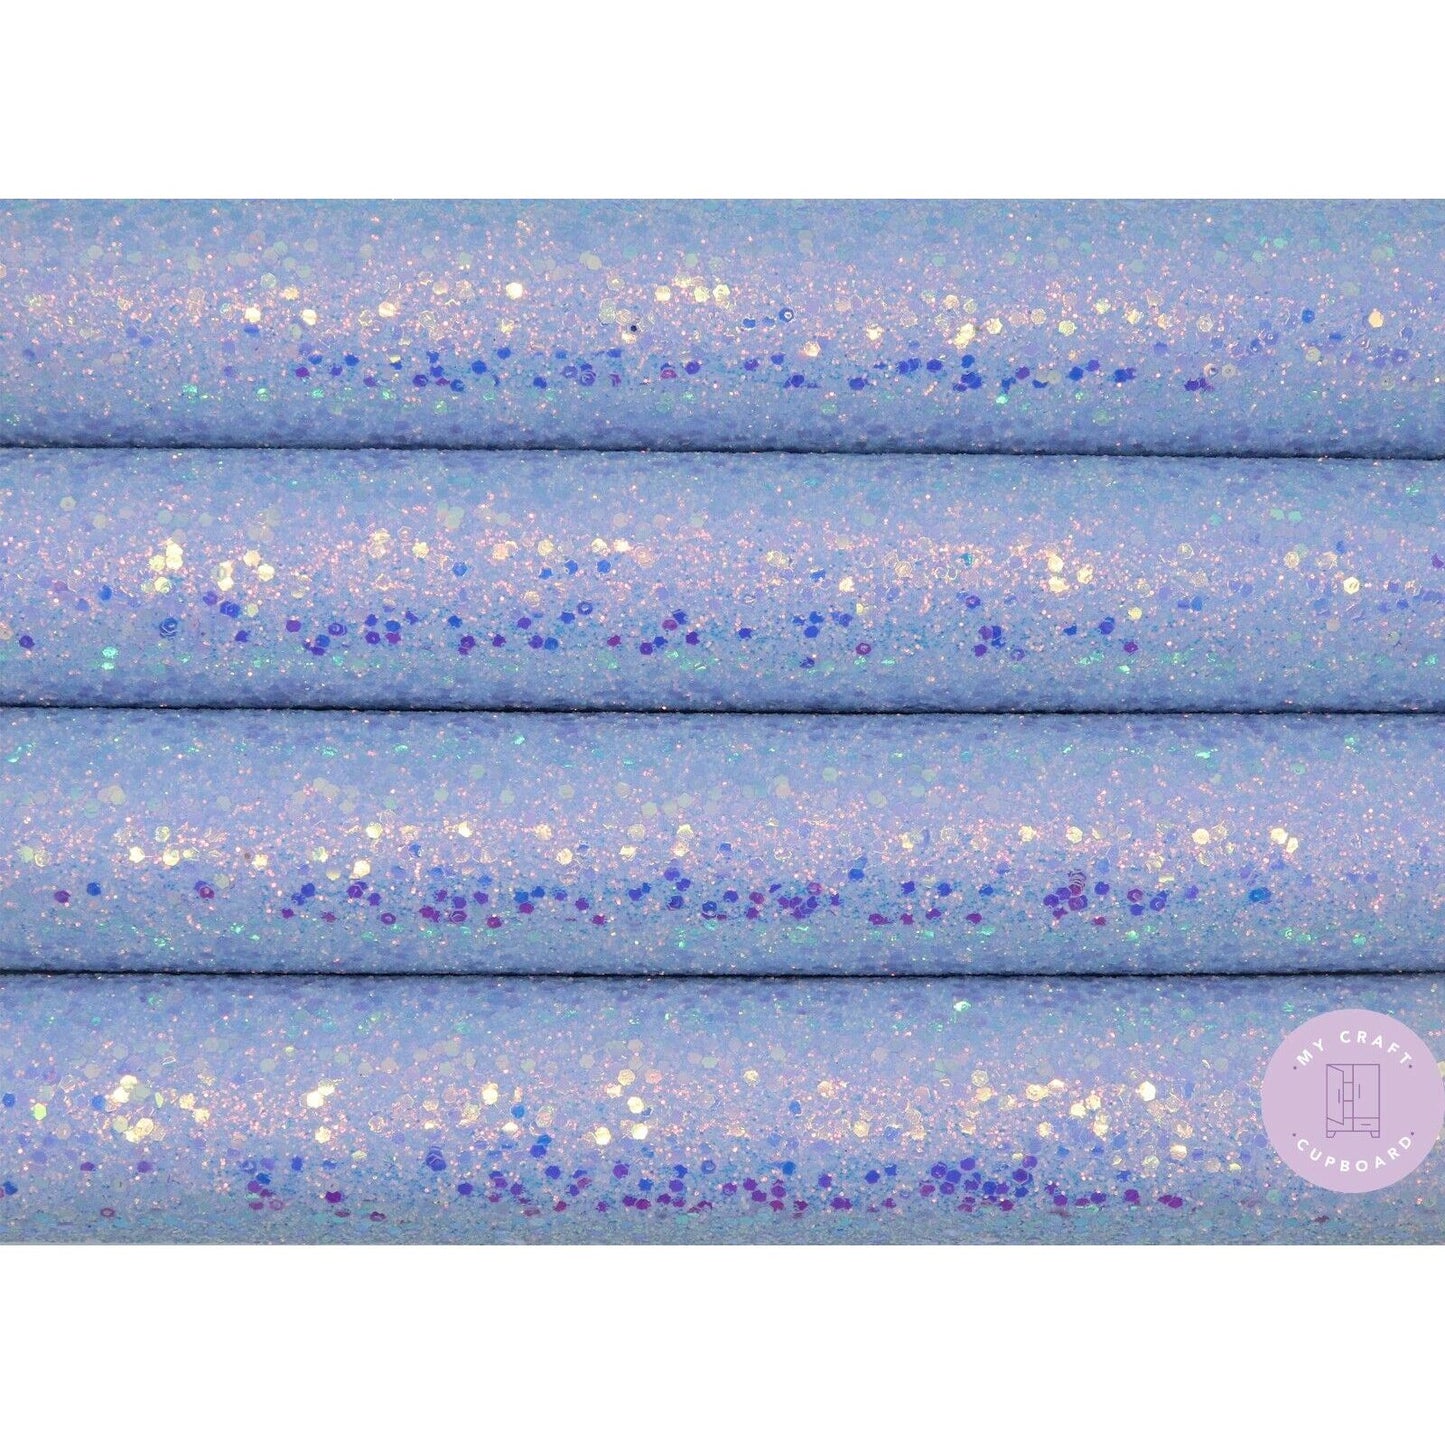 Chunky Glitter A4 Sheets - Hair Bow Making or Crafts - The Princess Collection